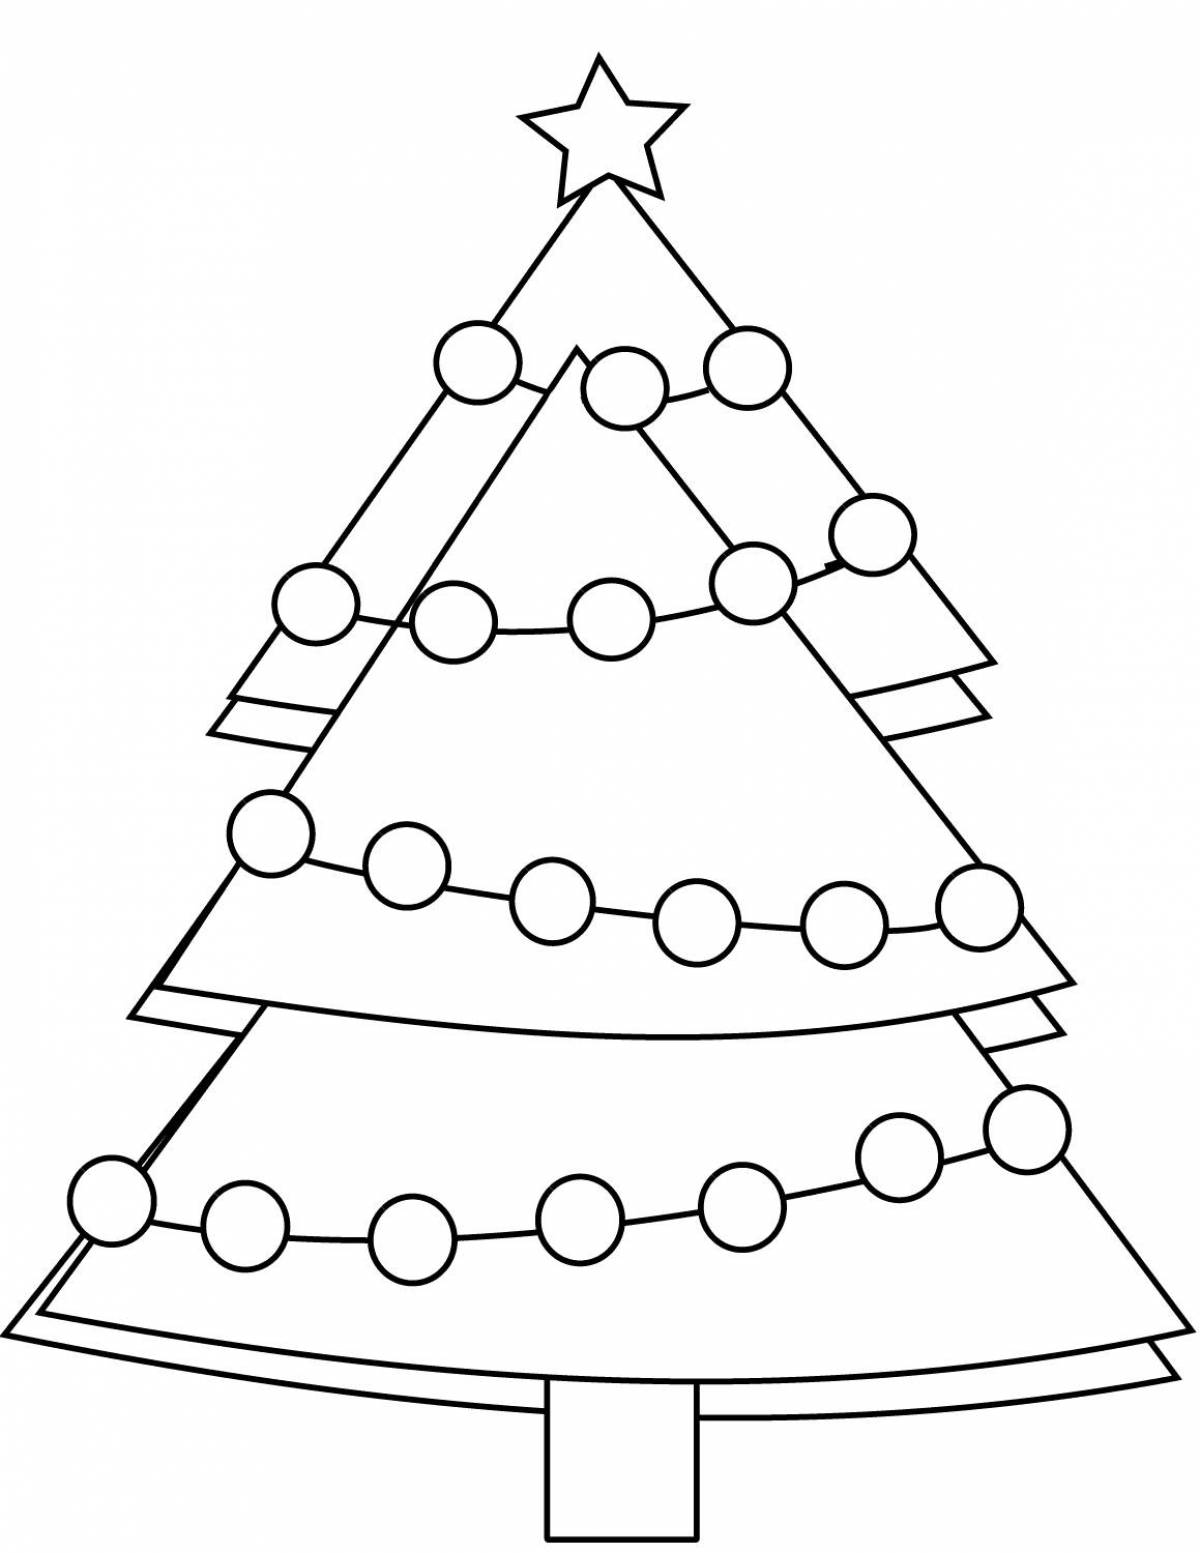 Cute Christmas tree coloring book for 3-4 year olds